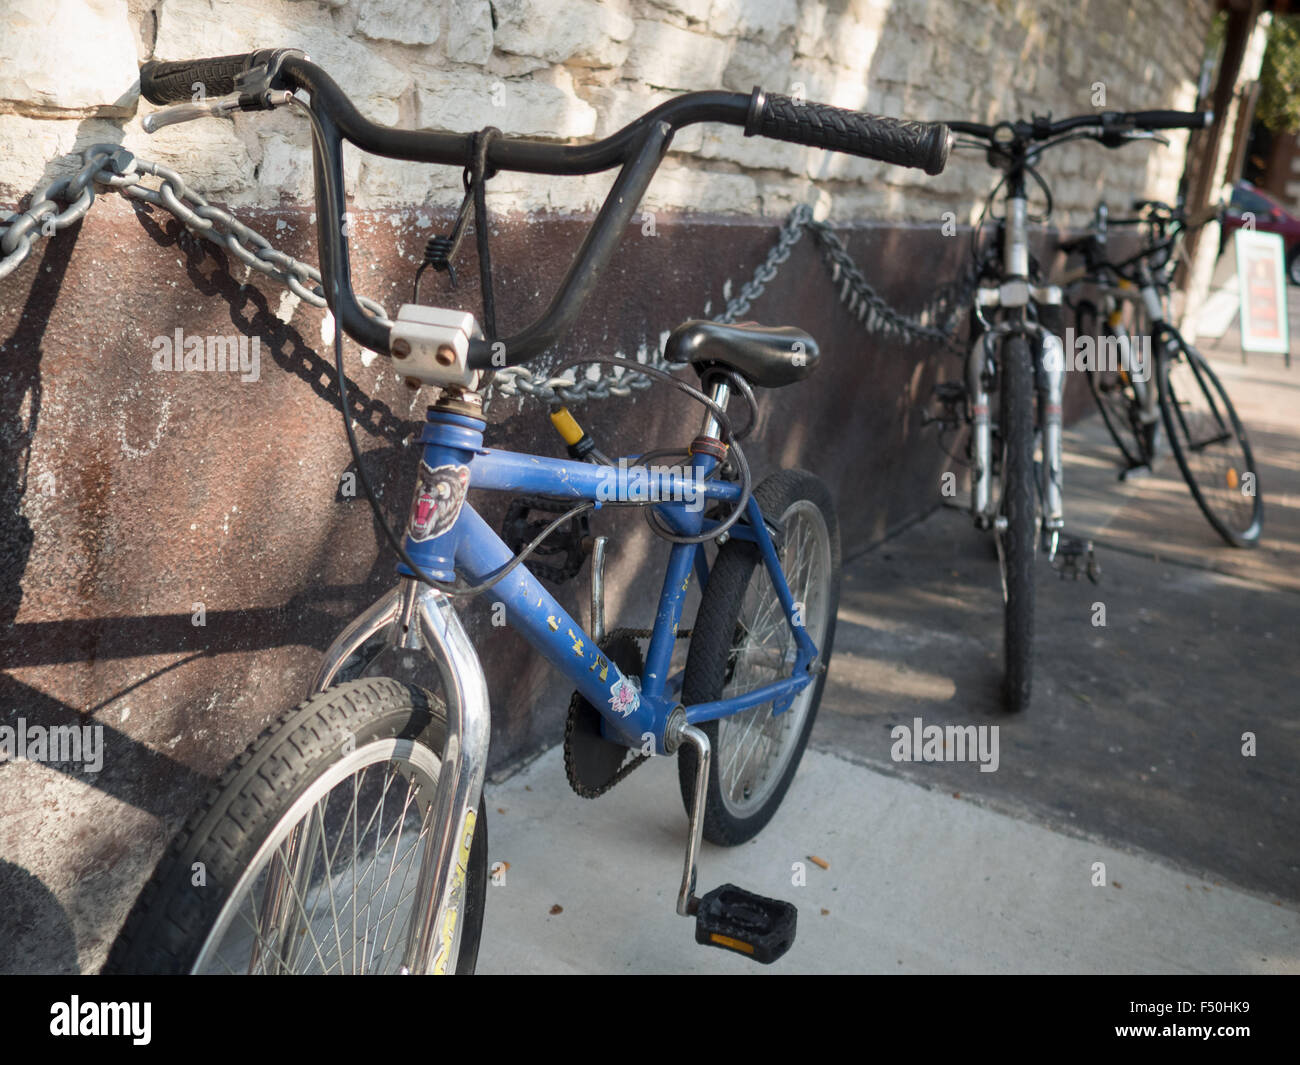 Bicycles locked up to a metal chain in an urban environment Stock Photo